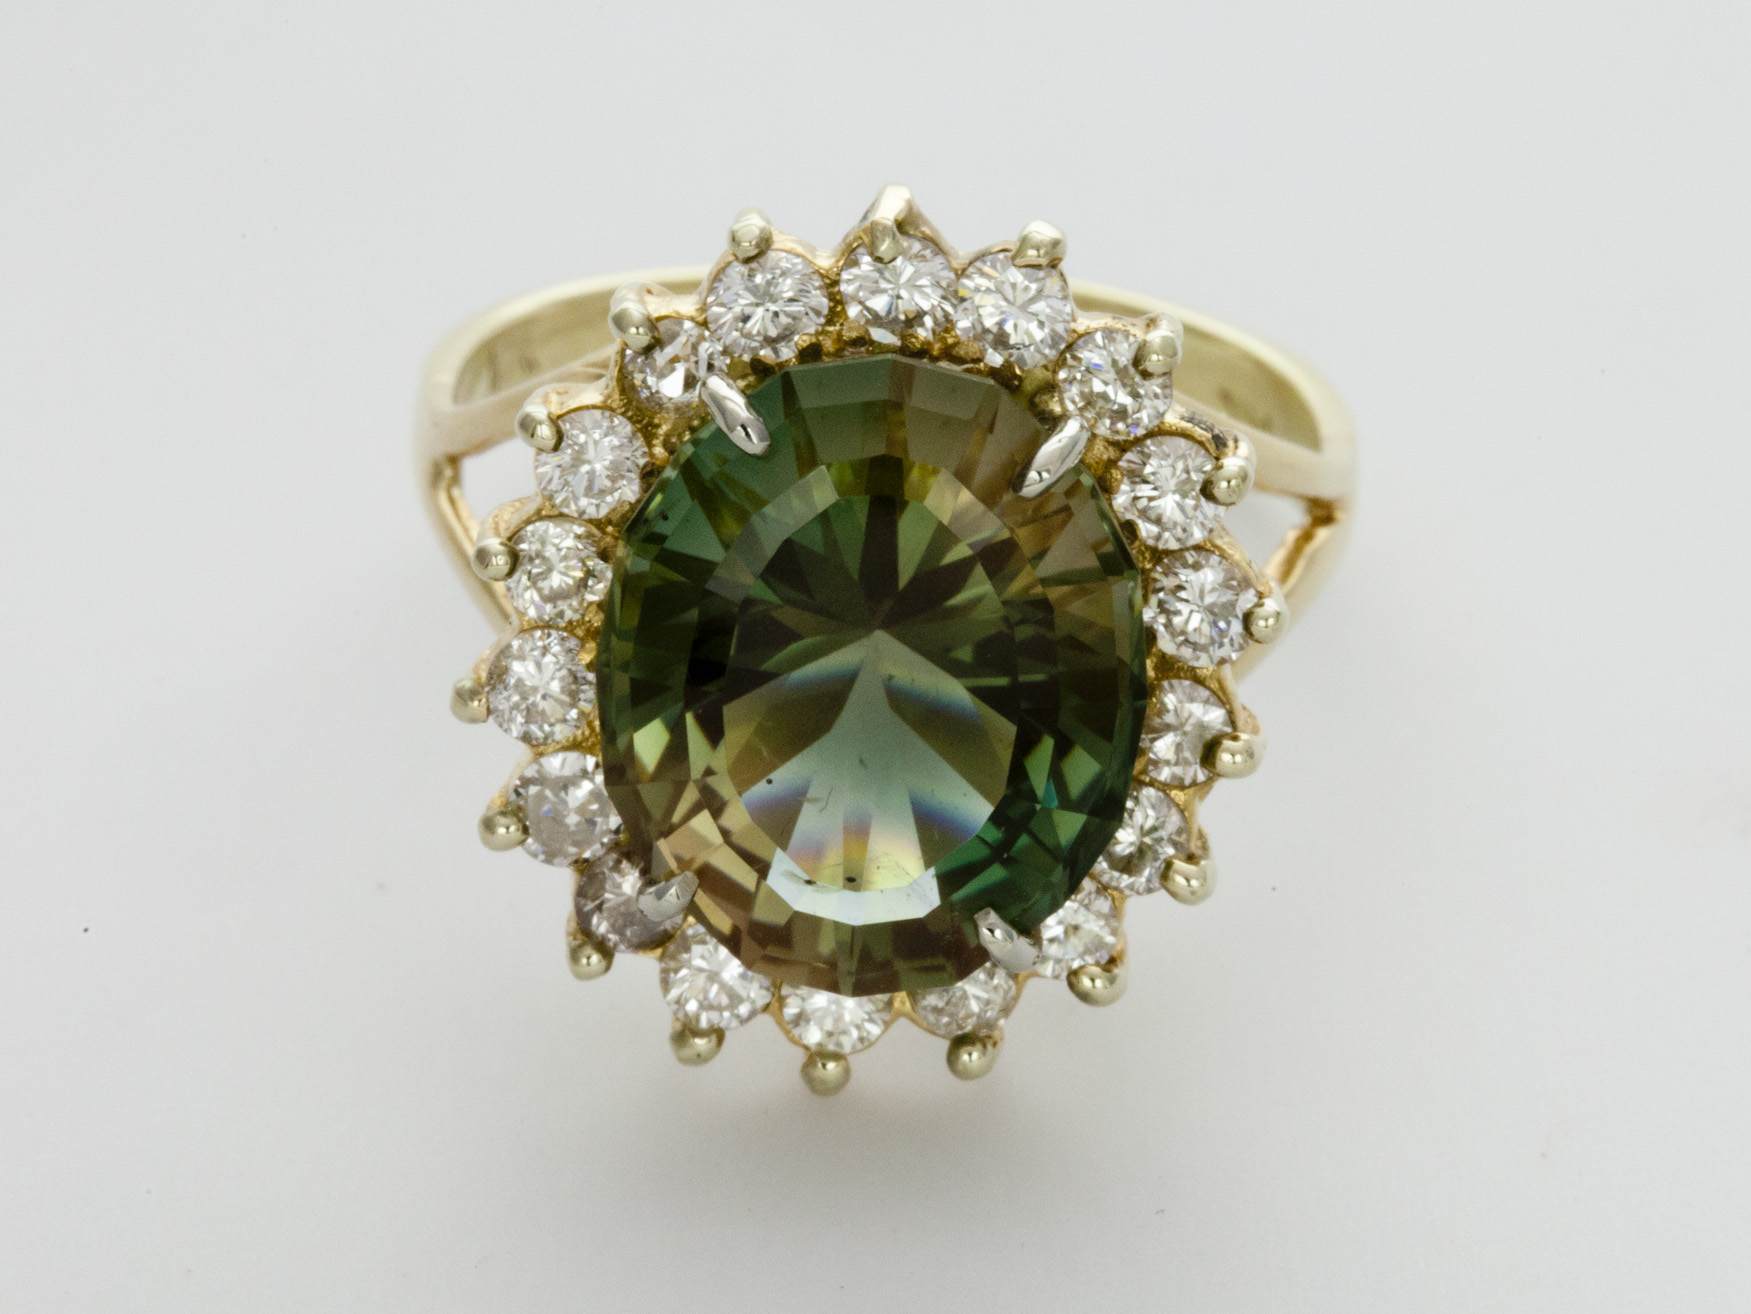 Green Sunstone, Yellow Gold Ring with Diamonds